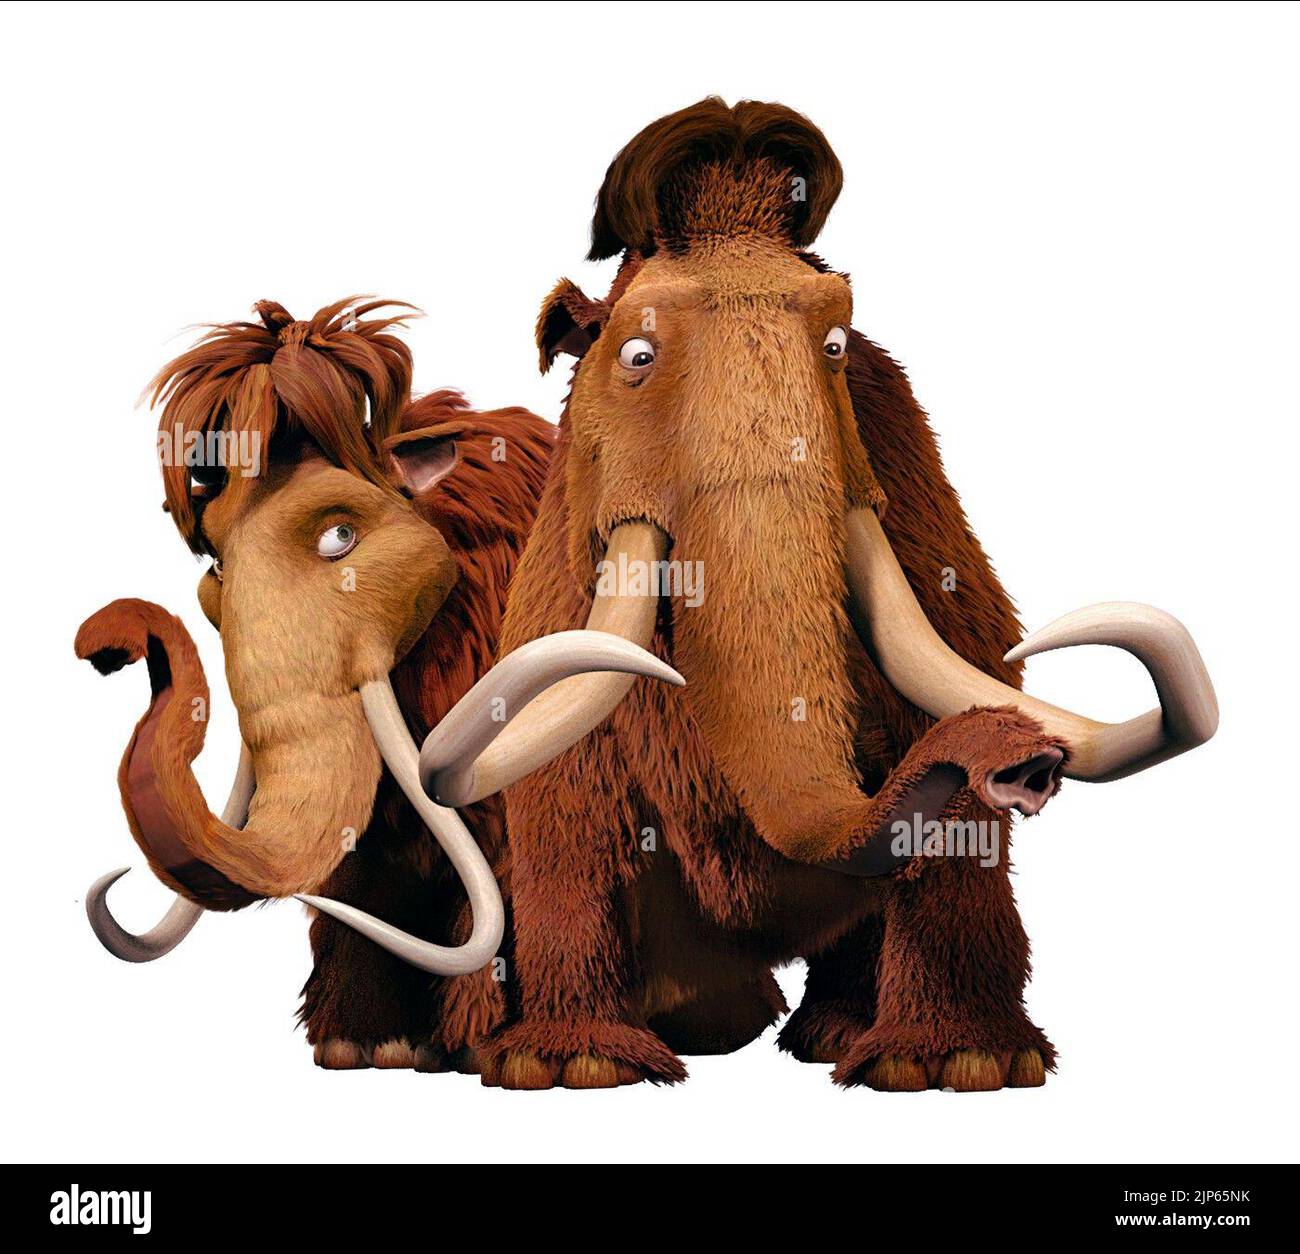 ELLIE, MANNY, Ice Age: Dawn of the Dinosaurs, 2009 Foto Stock